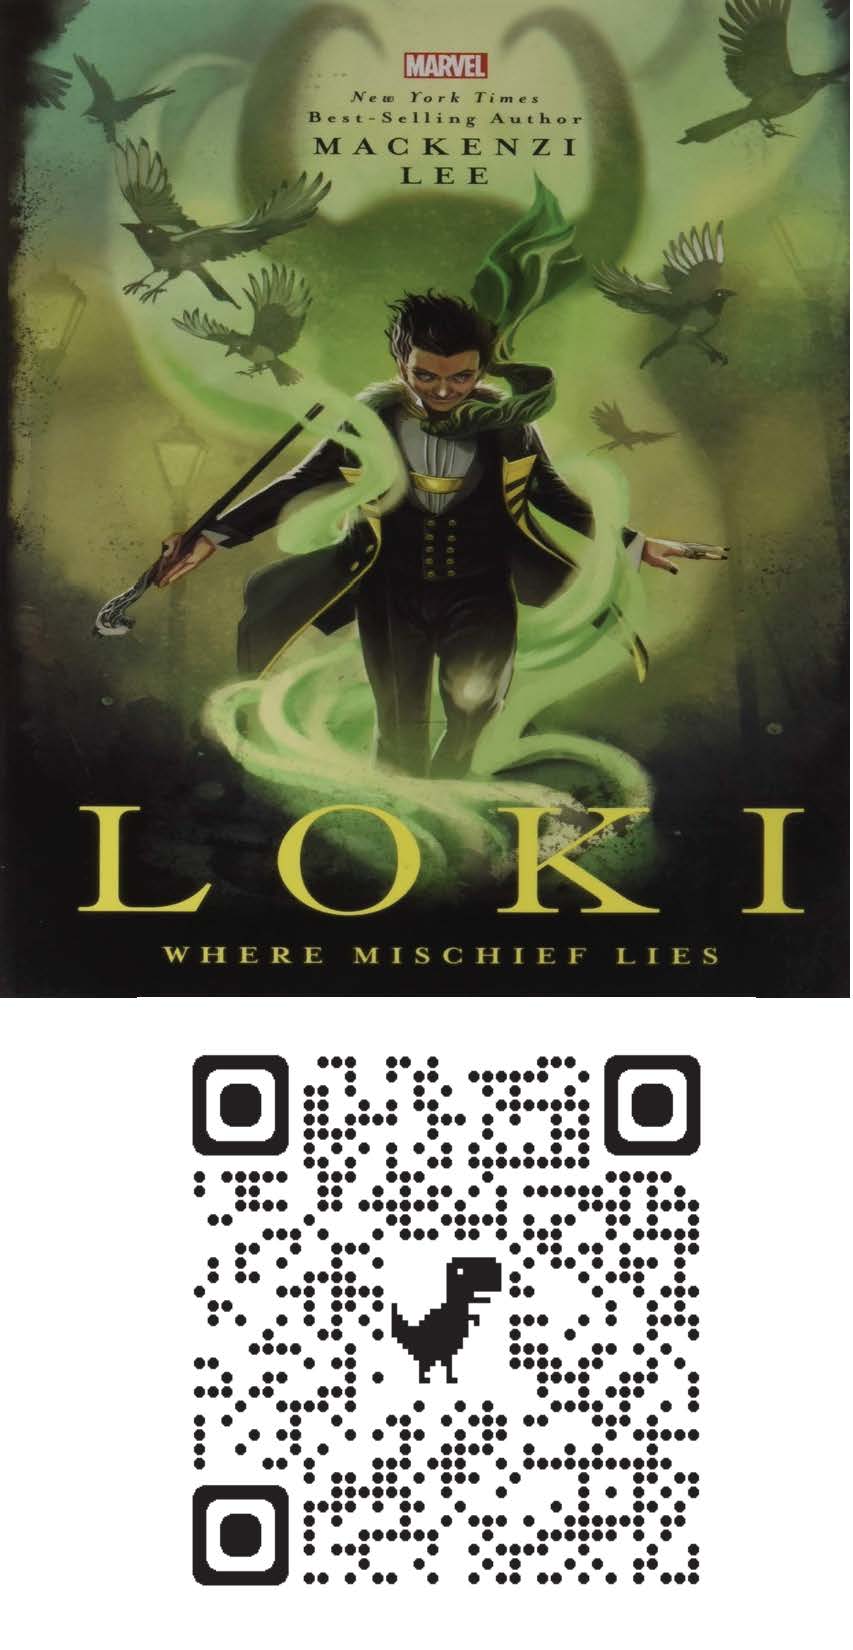 Book cover of the novel Loki featuring a cartoon image of the Marvel character Loki. Under the book cover is a QR Code to scan to download the book from Hoopla. 